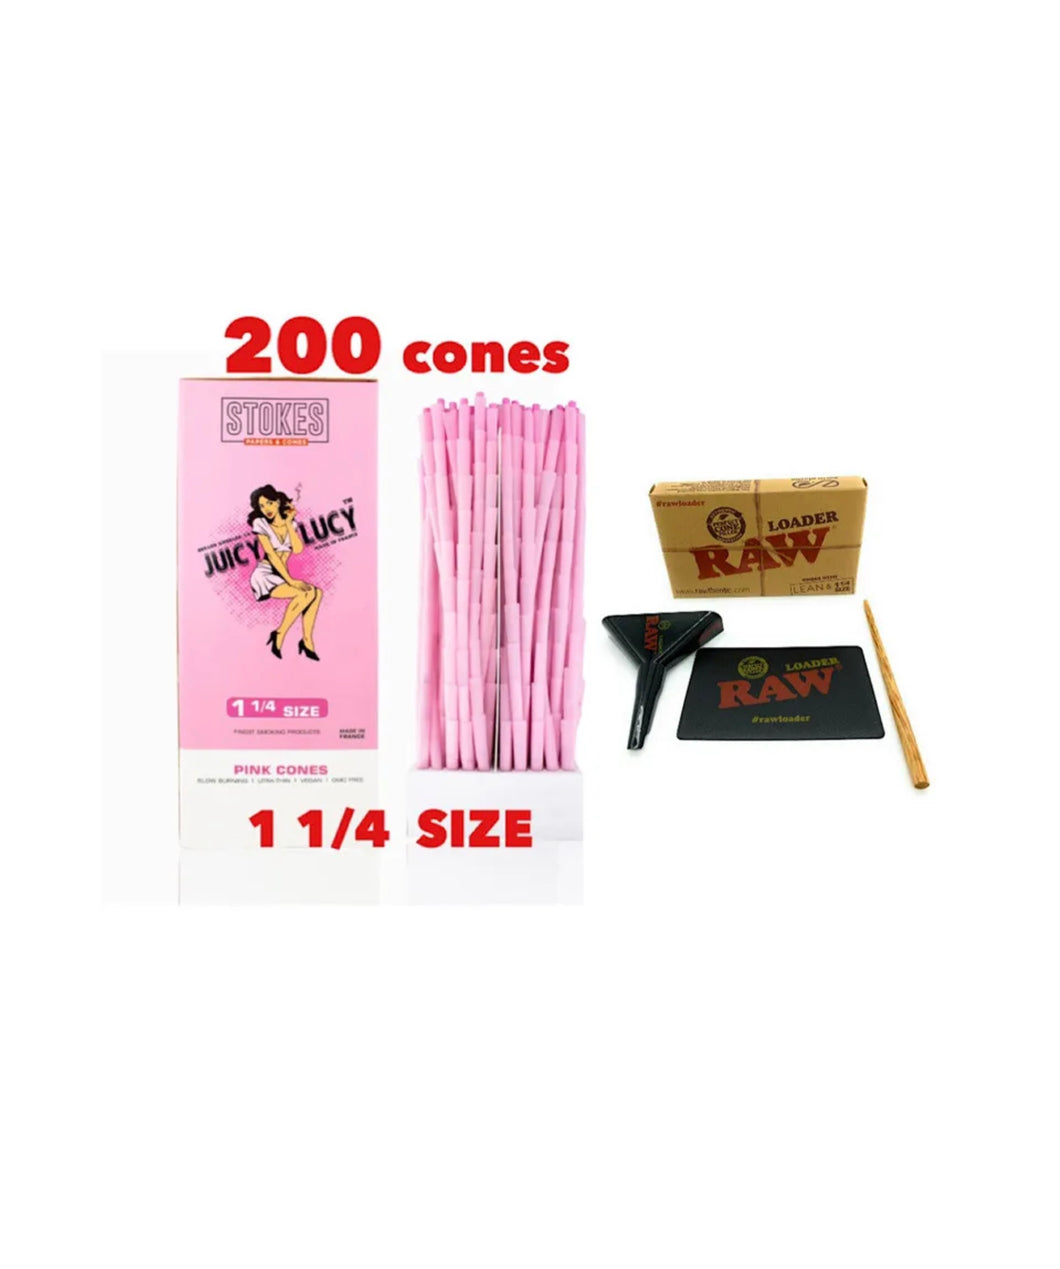 JUICY LUCY PINK cone 1 1/4 size (200ct, 100ct 50ct) MADE IN FRANCE+RAW 1 1/4 lean size loader